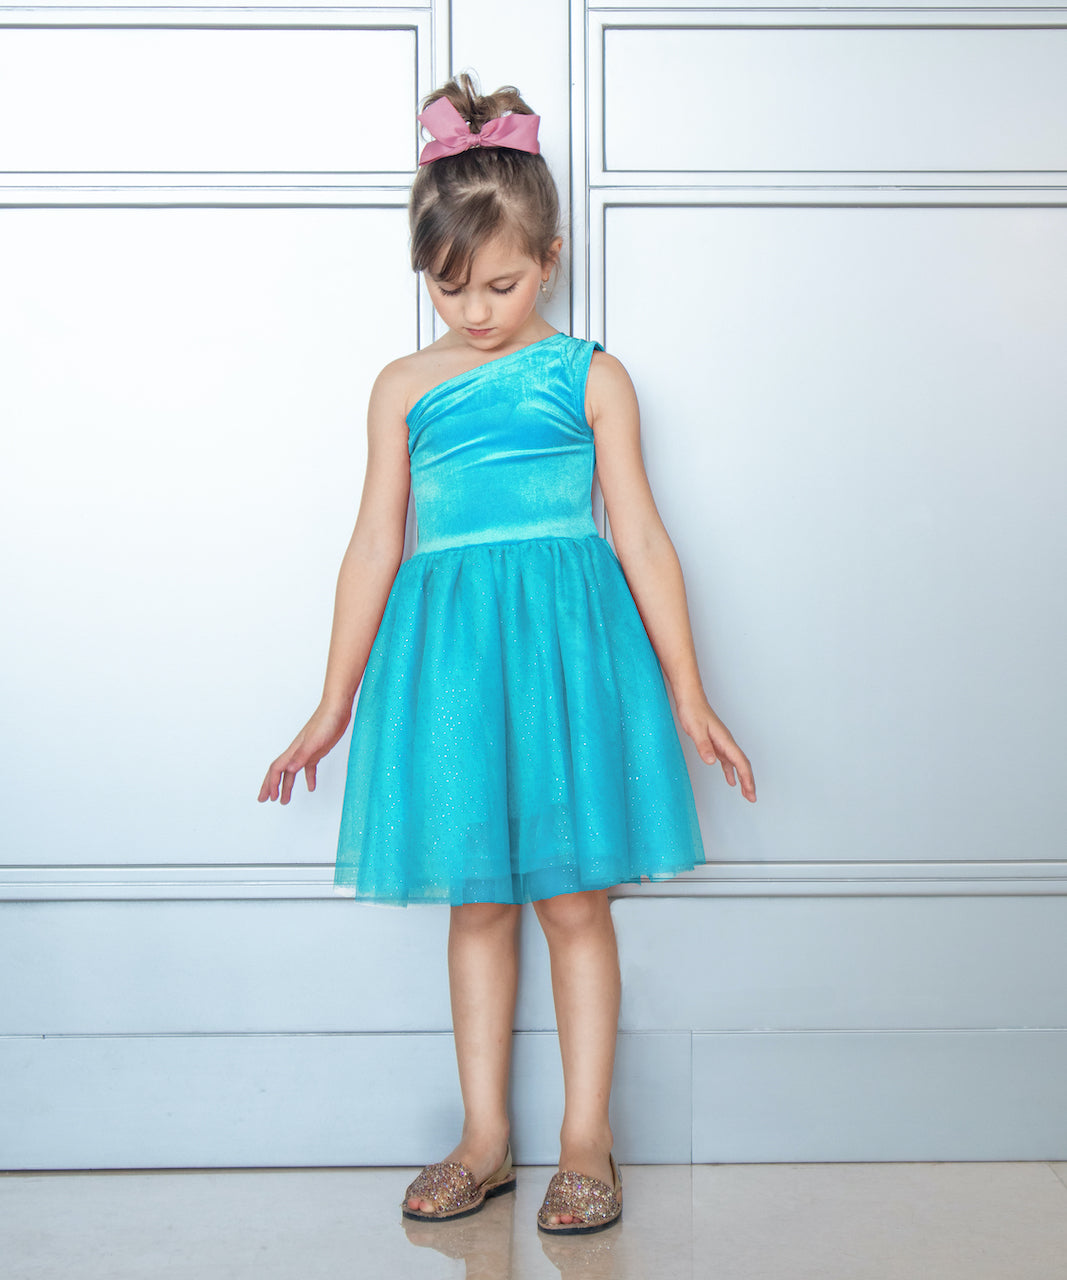 The Annie Dress Turquoise